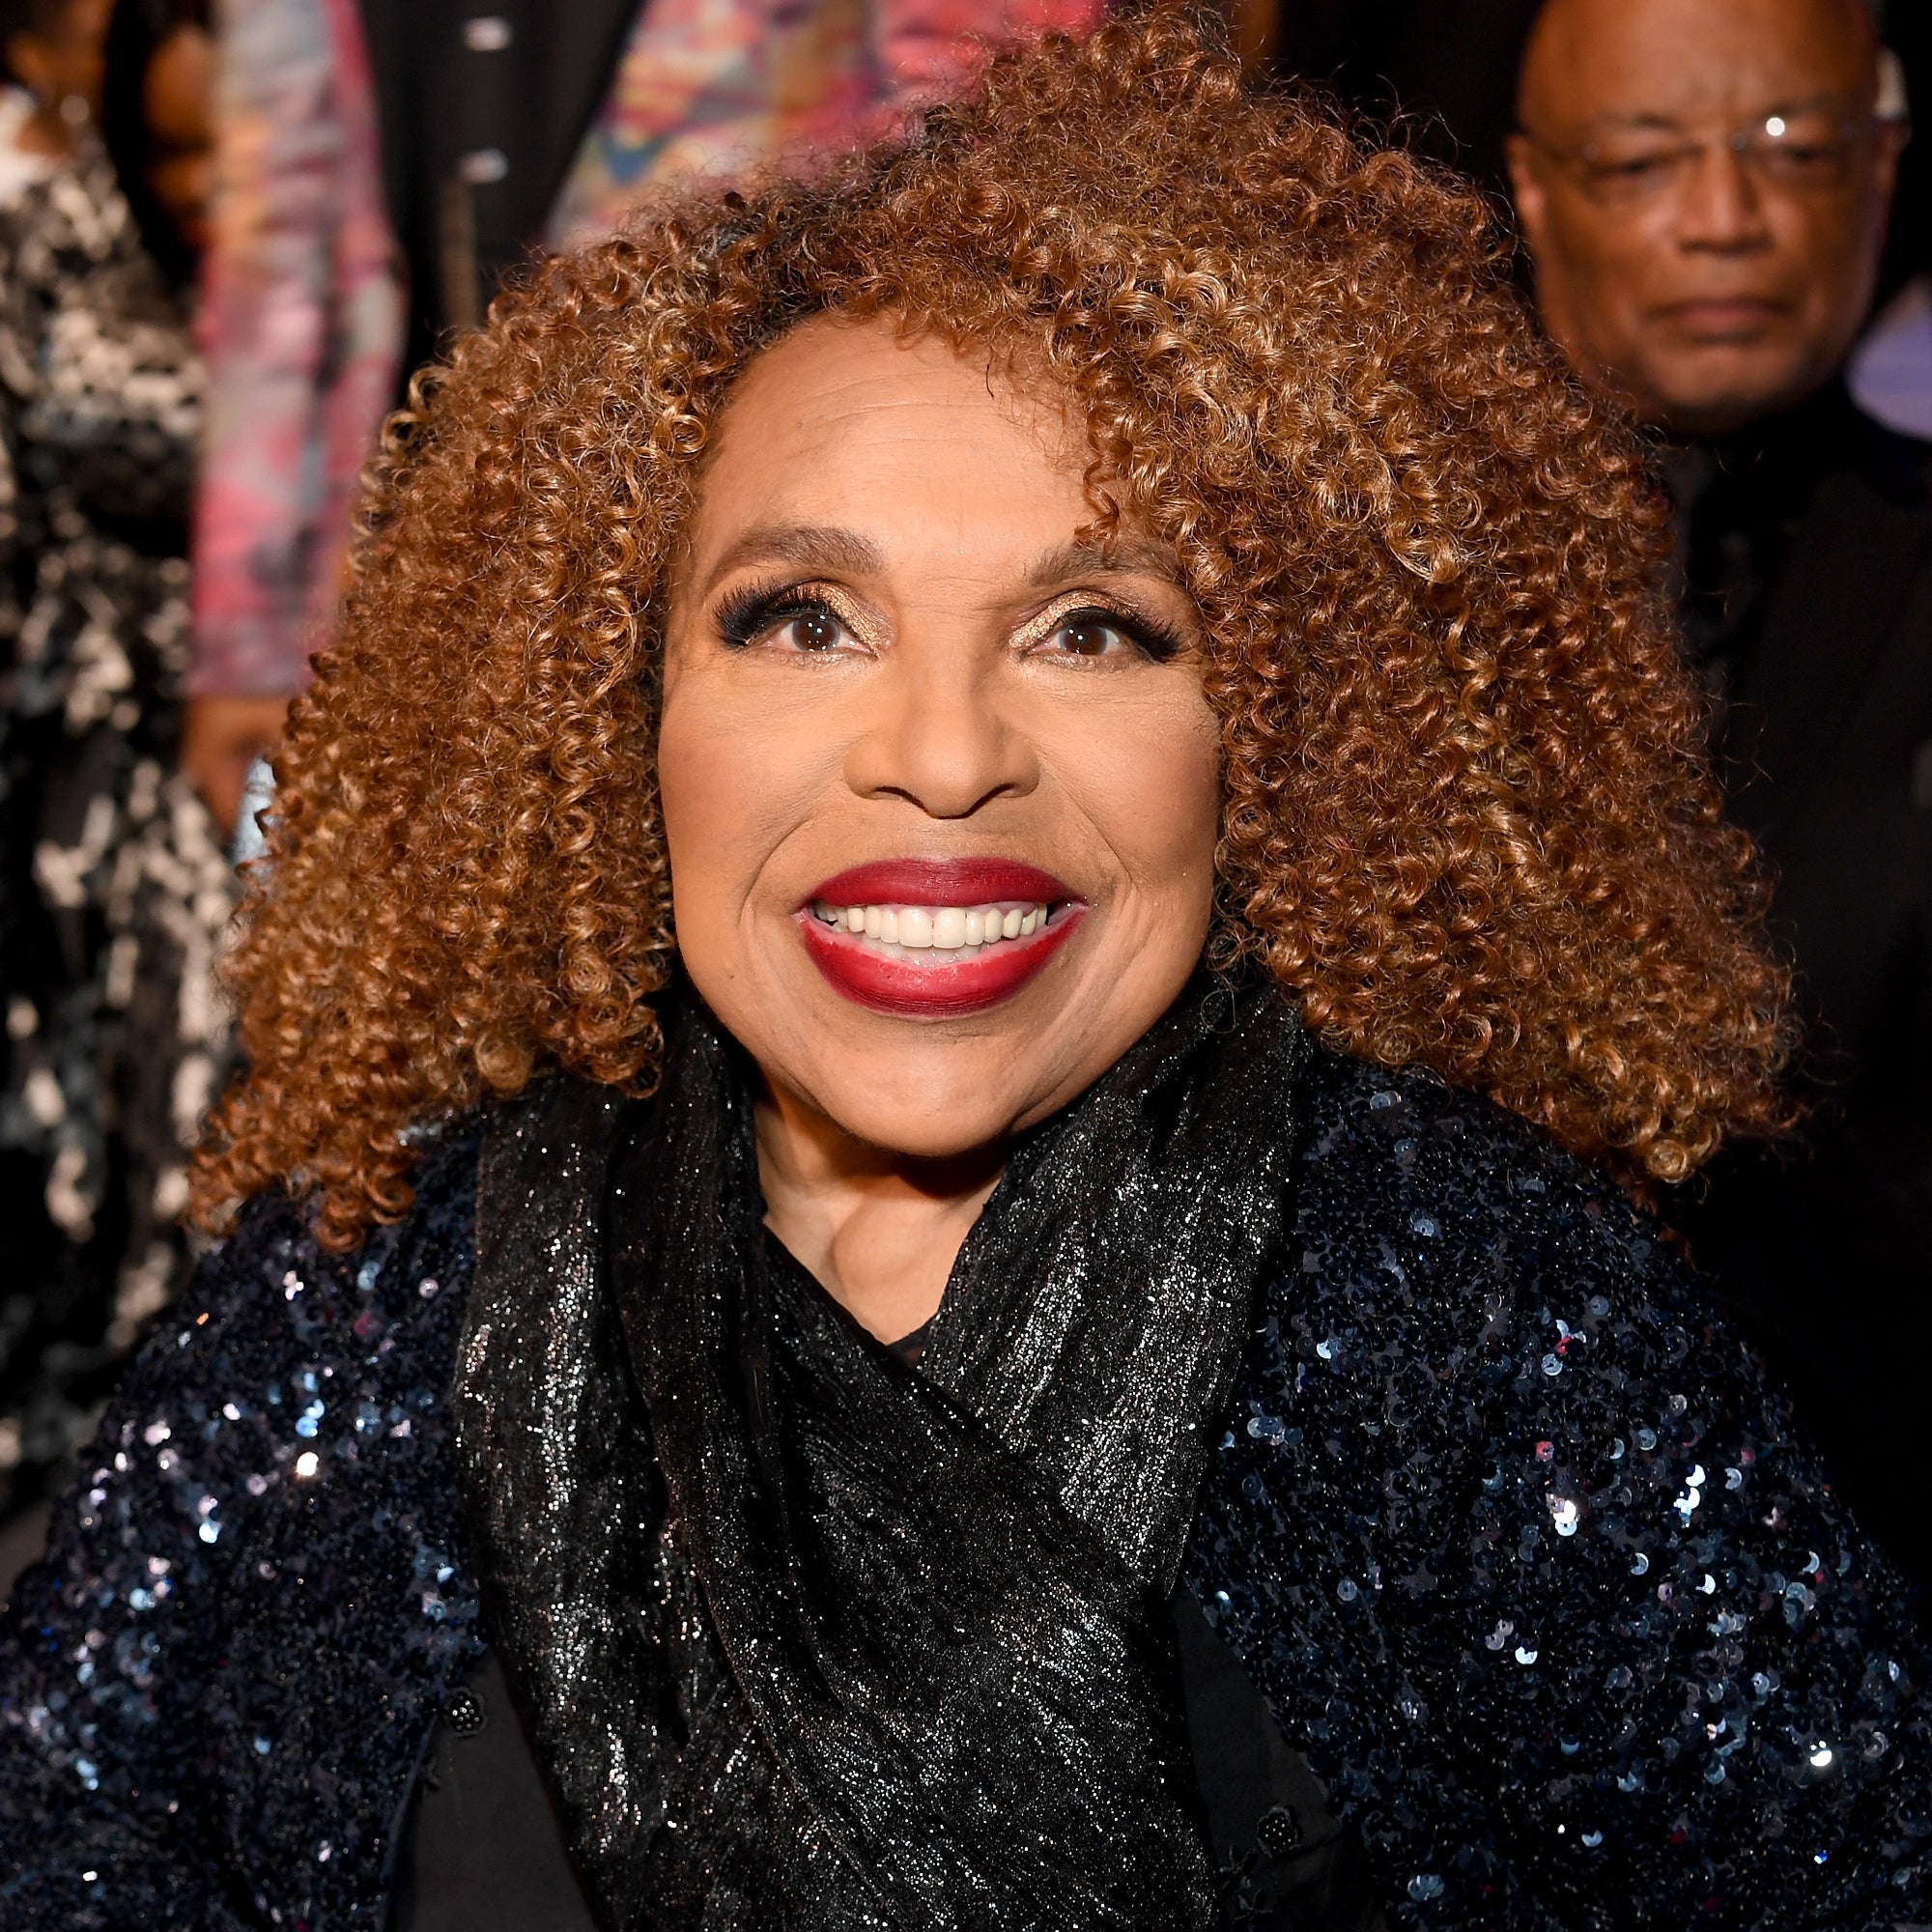 Singer Roberta Flack Rushed to the Hospital After Cutting Apollo Theater Performance Short
